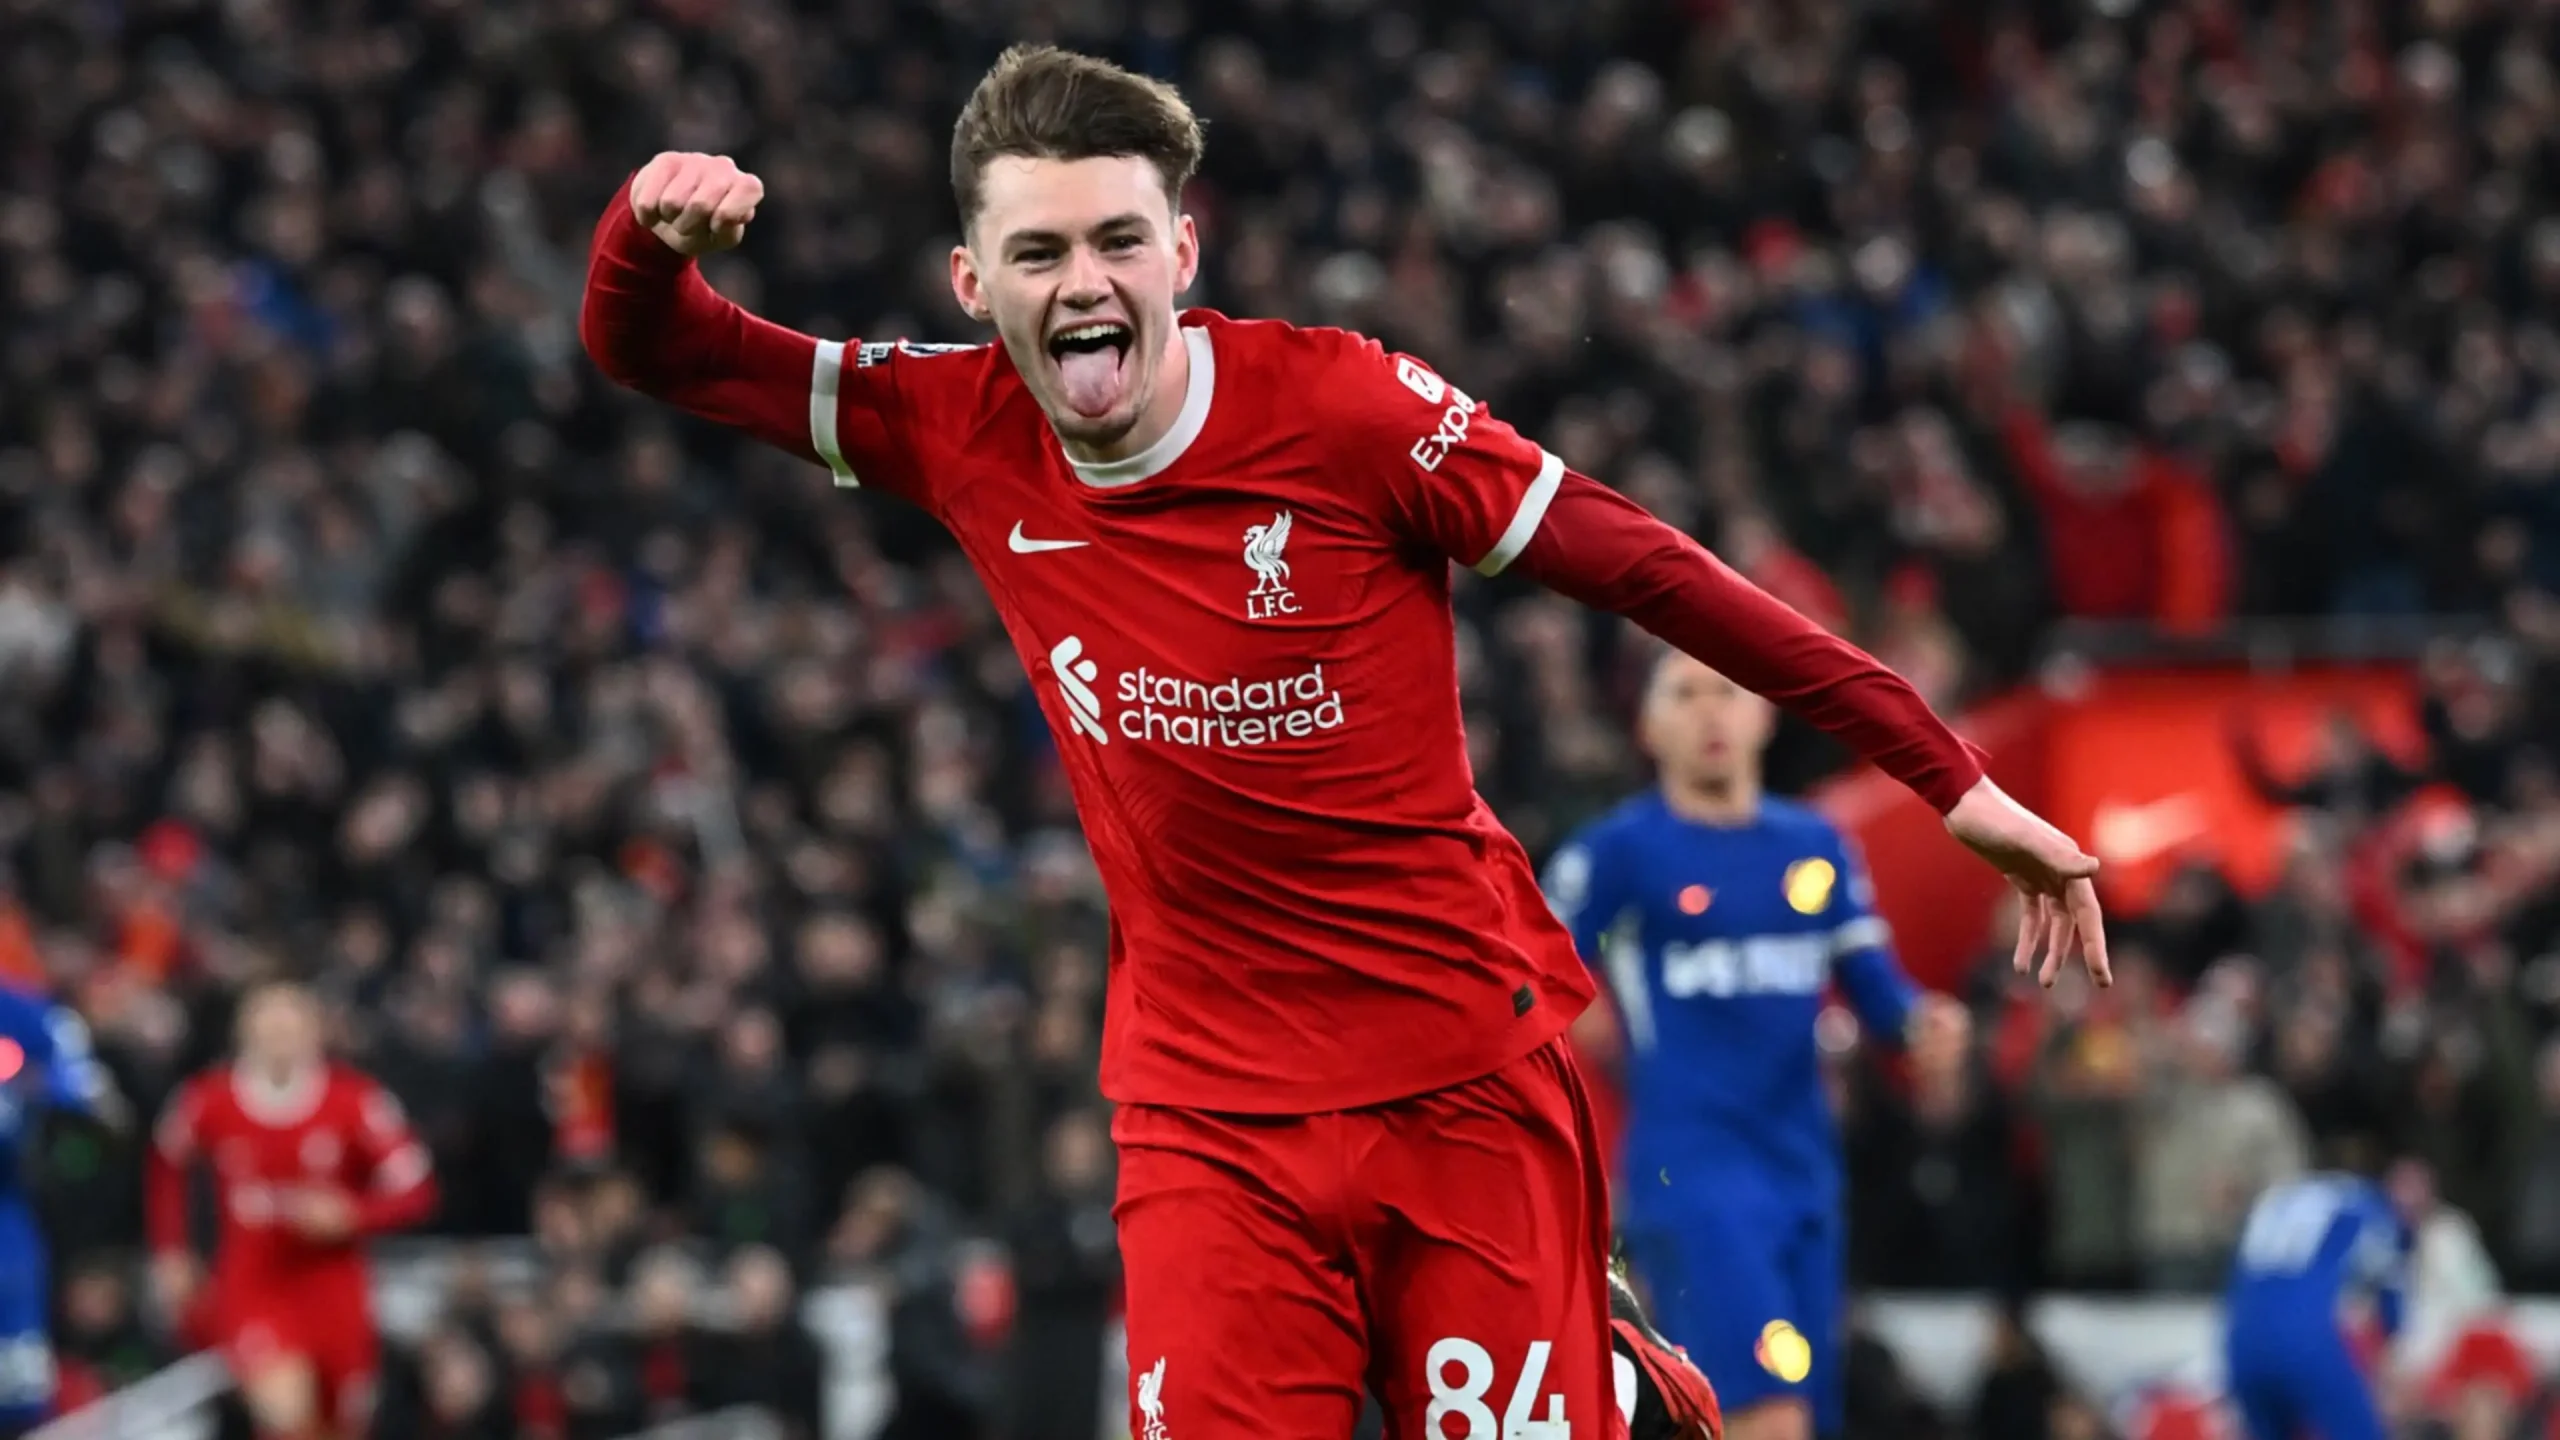 CONOR BRADLEY SCORES AS LIVERPOOL TRASH CHELSEA 4-1 AT HOME